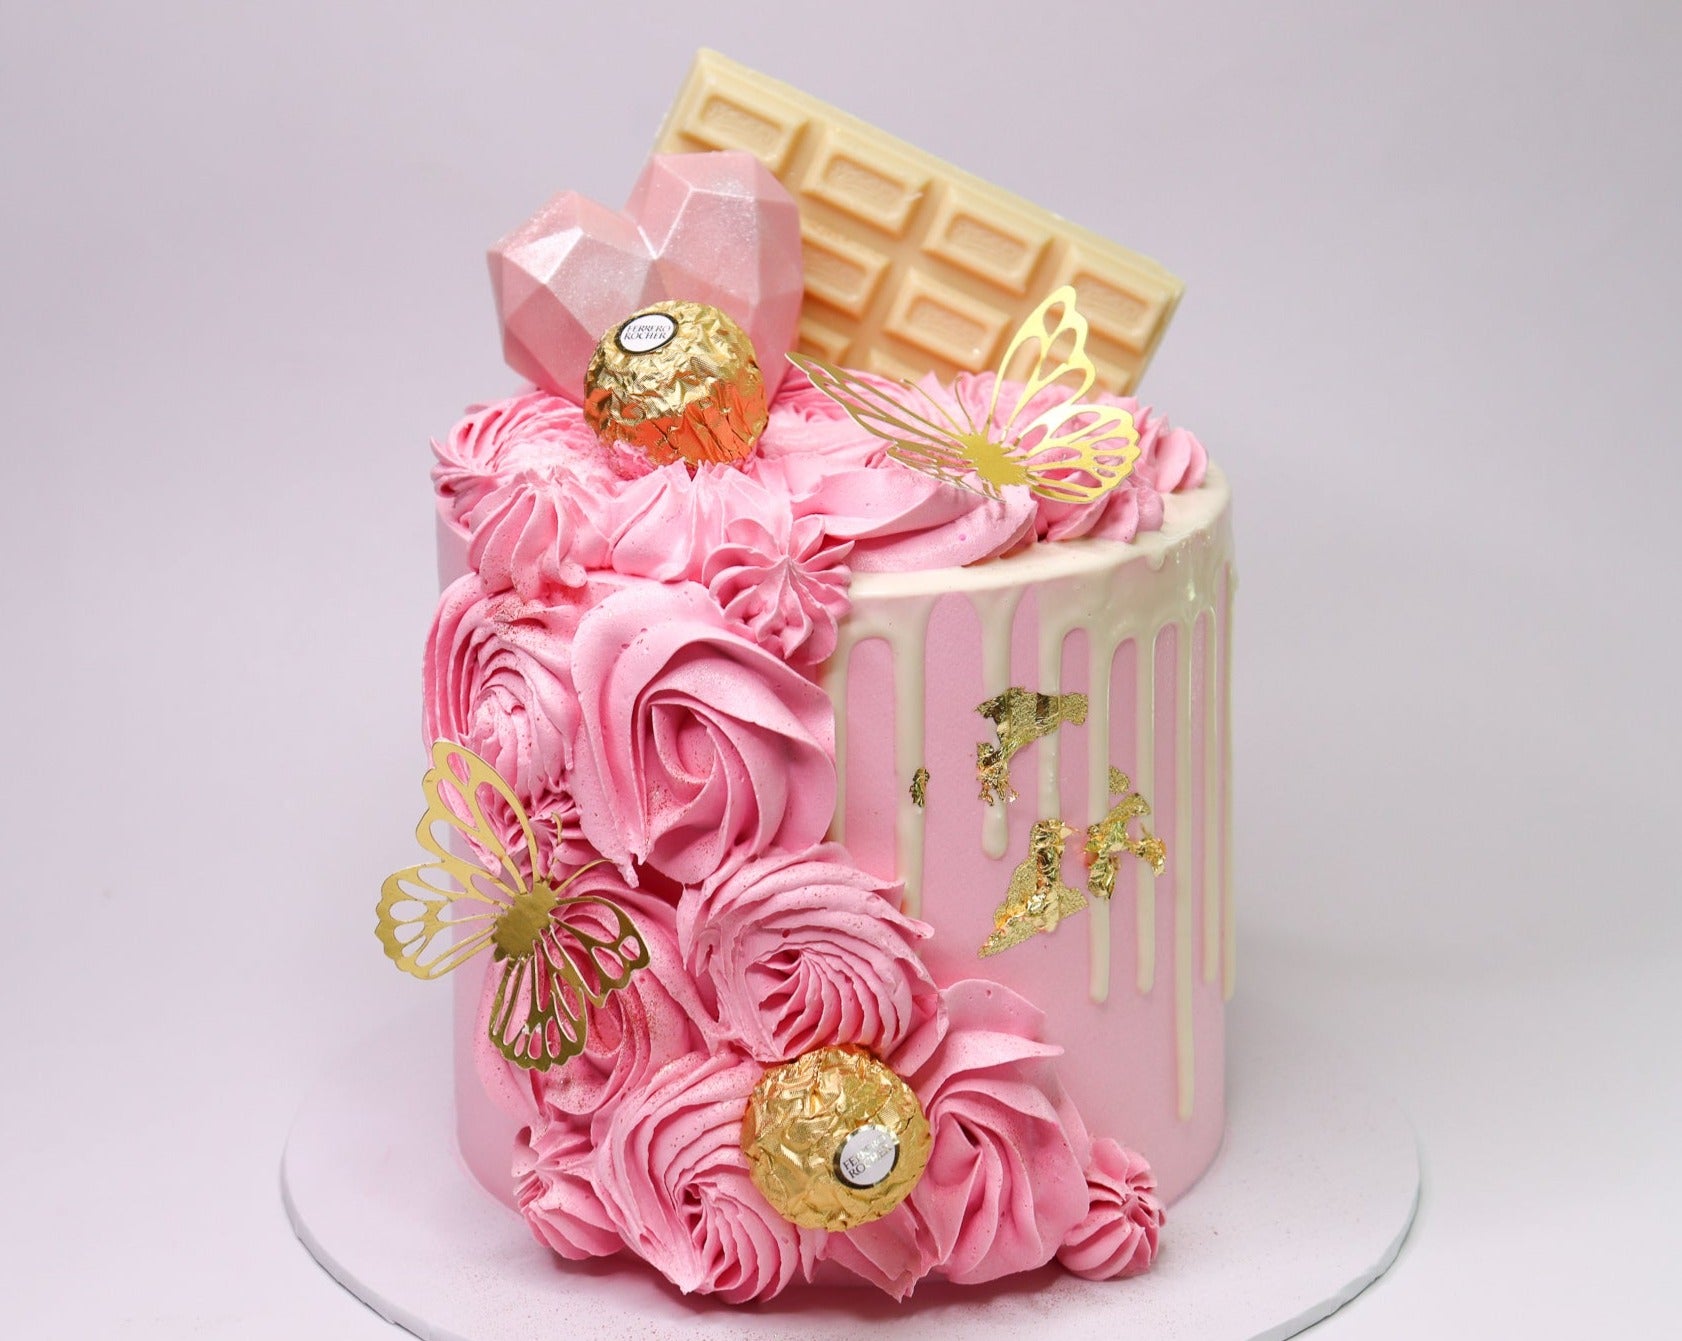 80 Rose Garden Pink Strawberry Cream Cake Half Kg Eggless | Birthday Cake |  Anniversary Cake | Next Day Delivery : Amazon.in: Grocery & Gourmet Foods